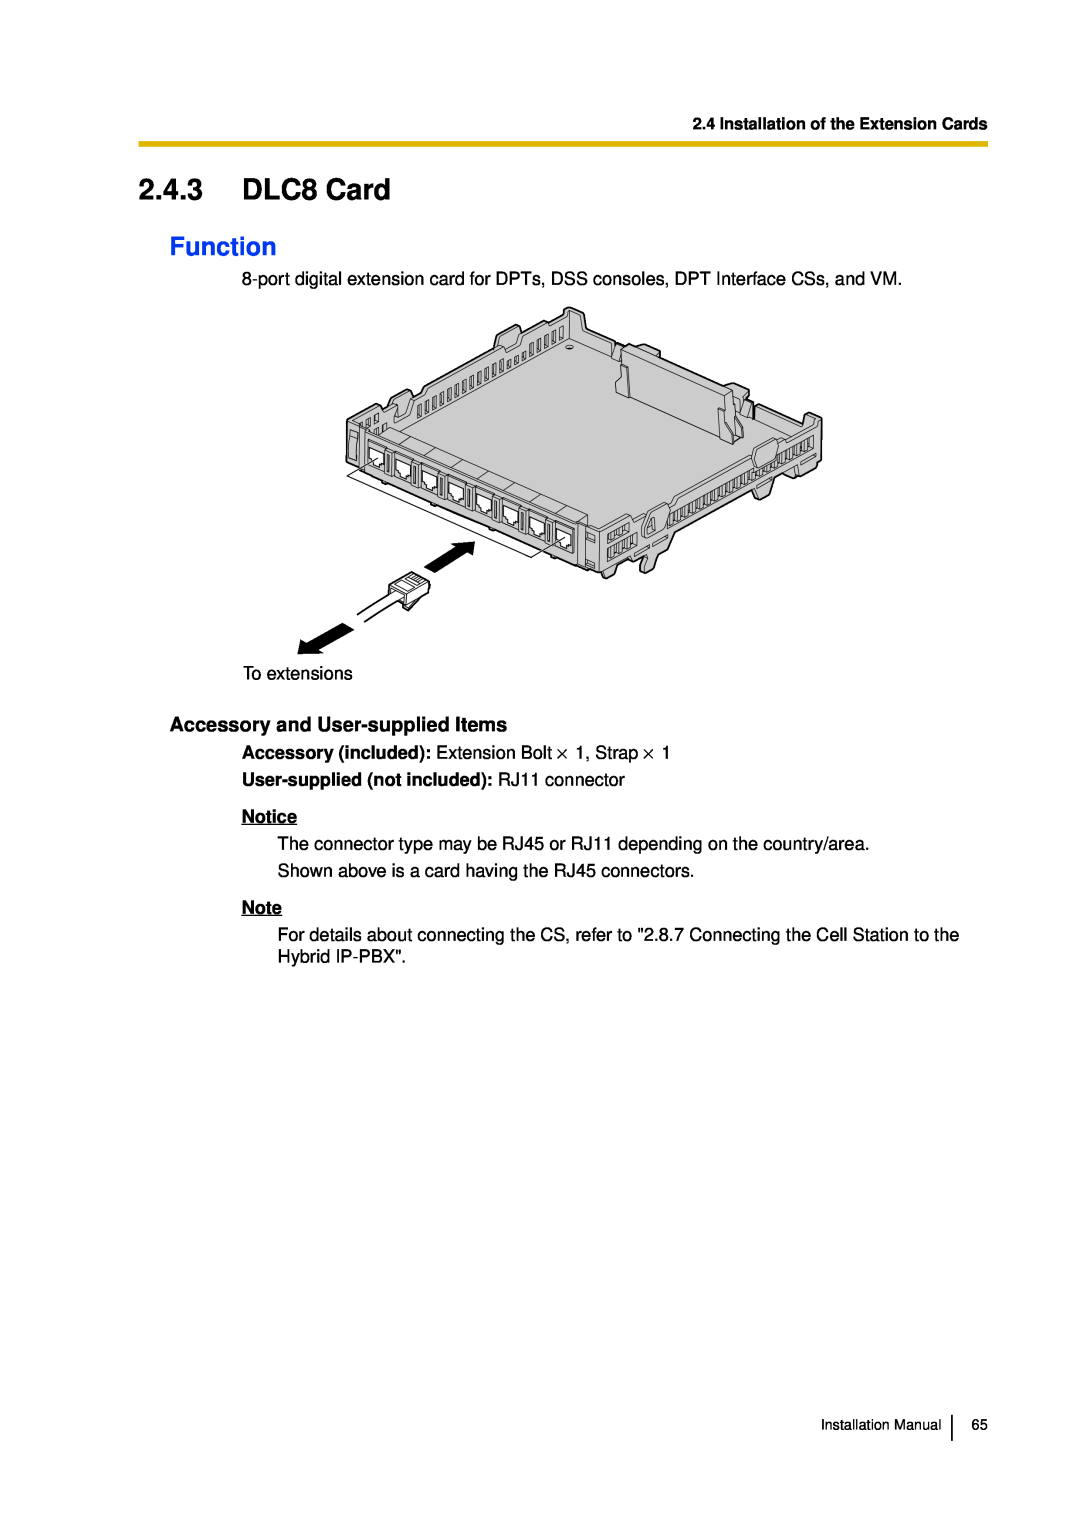 Panasonic KX-TDA30 installation manual 2.4.3DLC8 Card, Function, User-suppliednot included: RJ11 connector Notice 